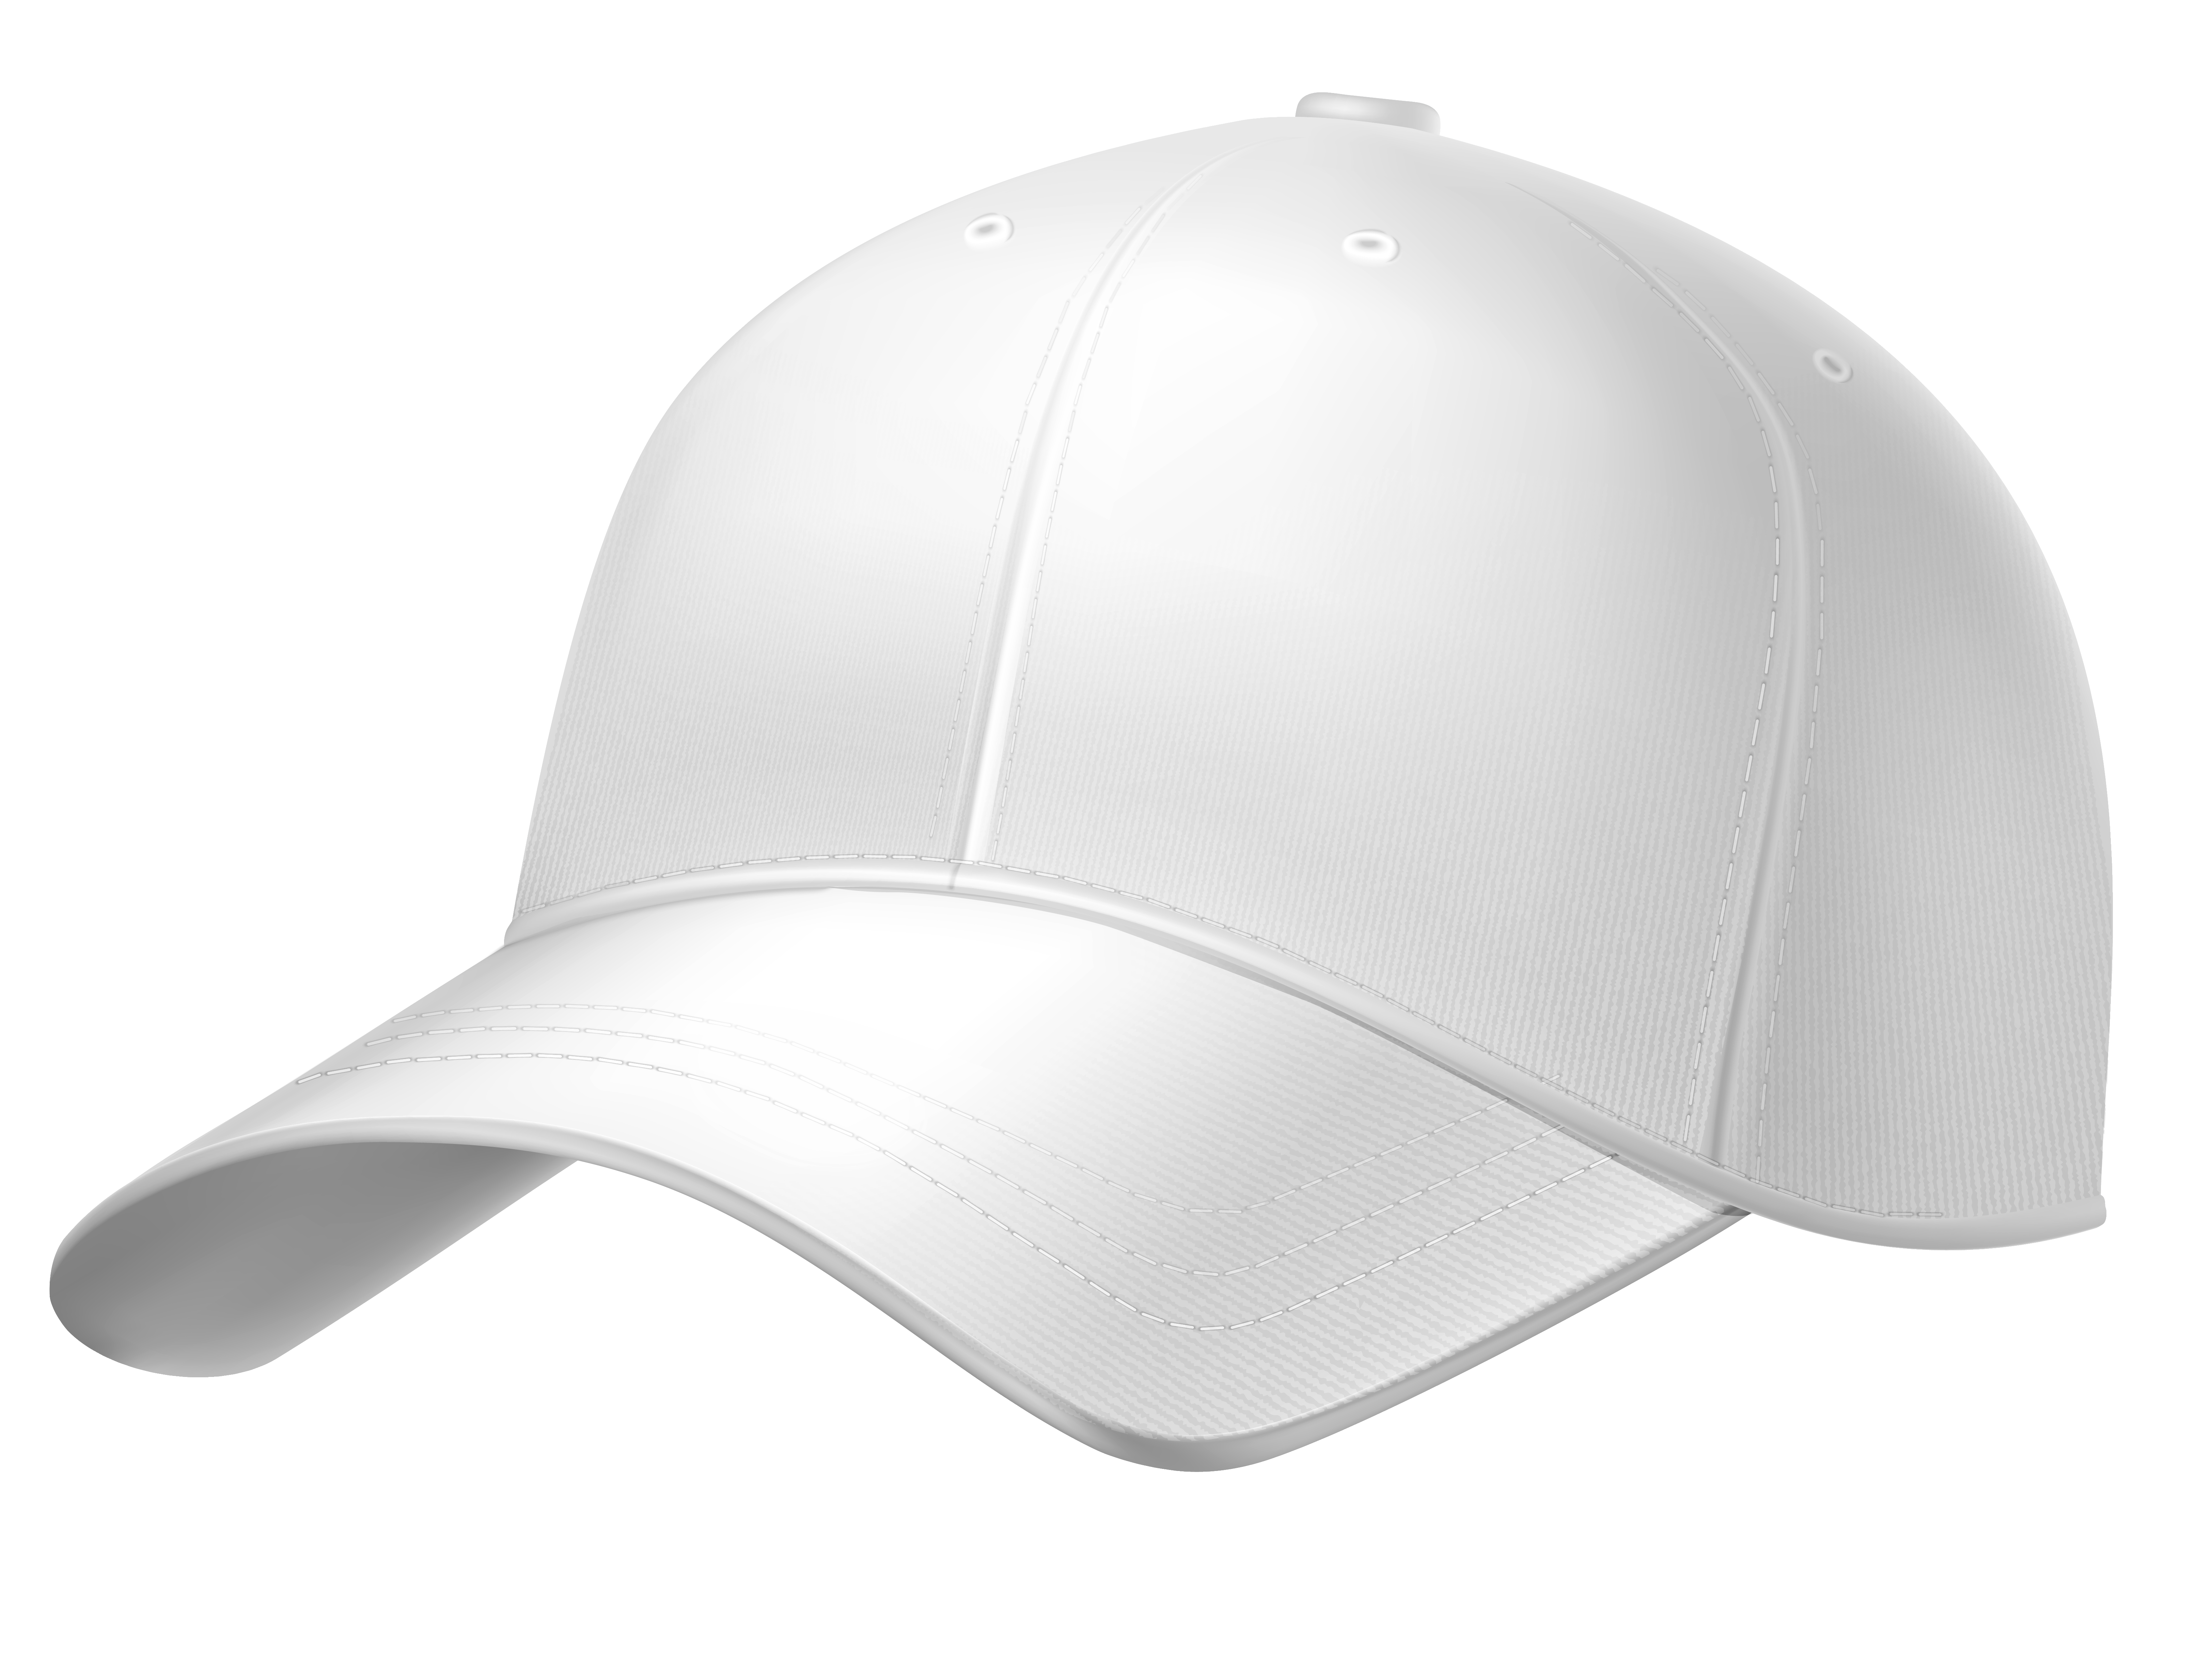 baseball hat clipart front